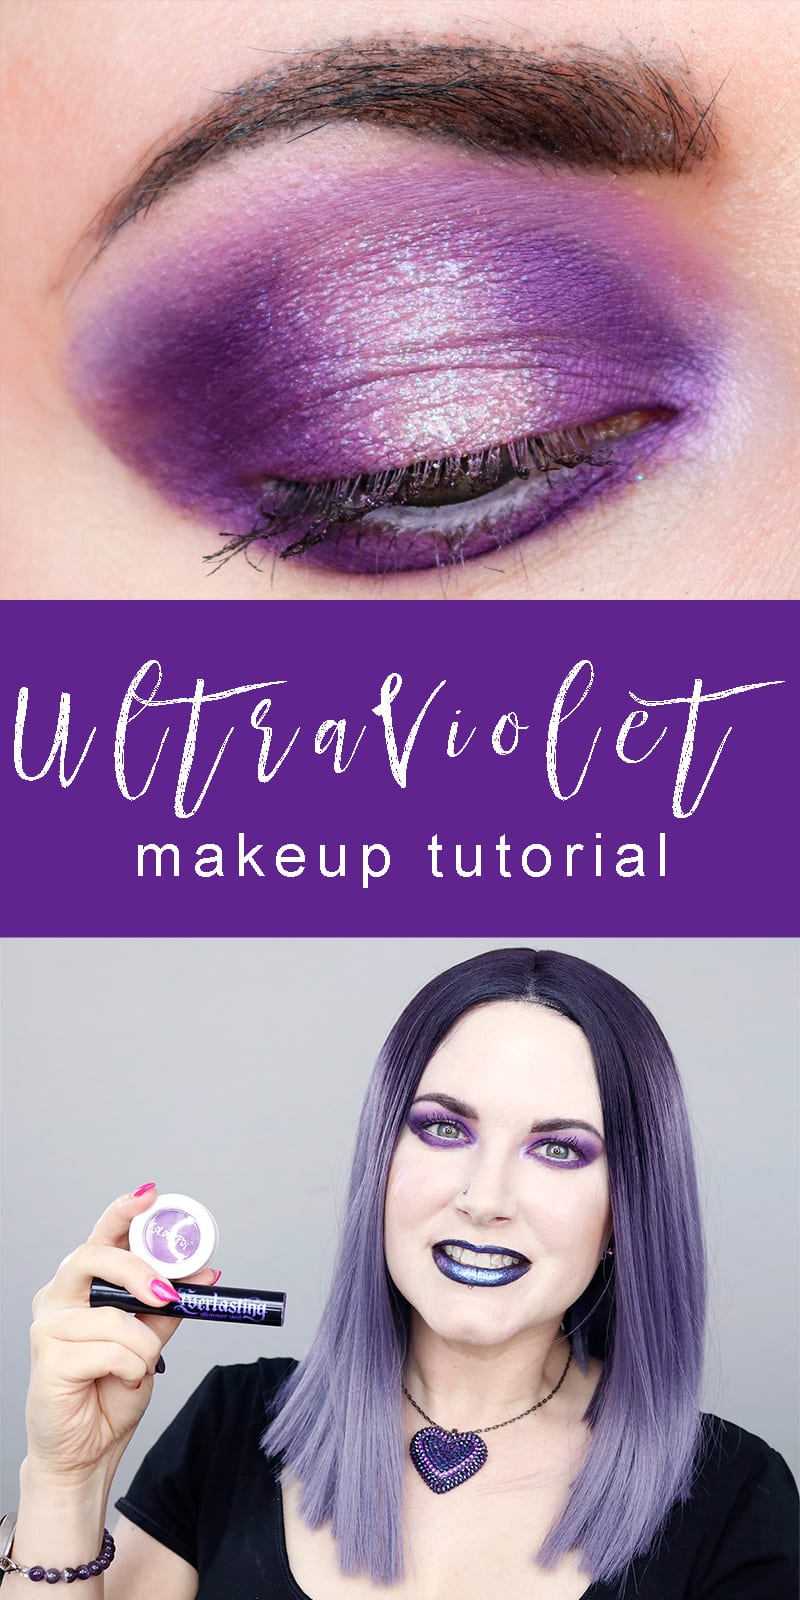 Cruelty-Free UltraViolet Makeup Tutorial - I show you how to wear this bold purple eyeshadow look with 5 different lip colors from nude to duochrome! 